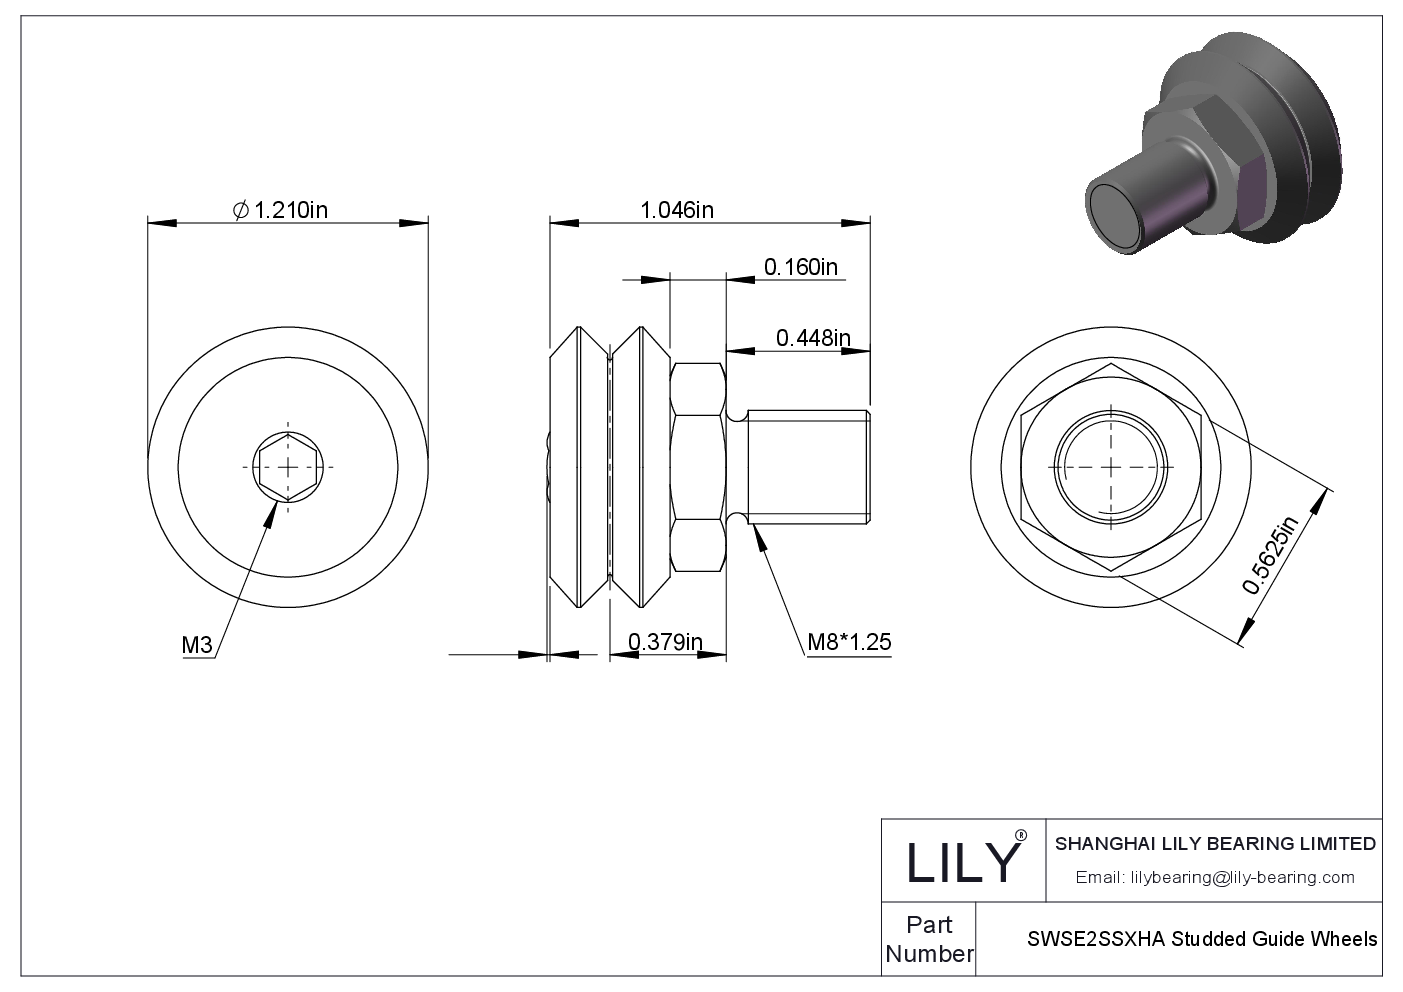 SWSE2SSXHA Studded Guide Wheels cad drawing